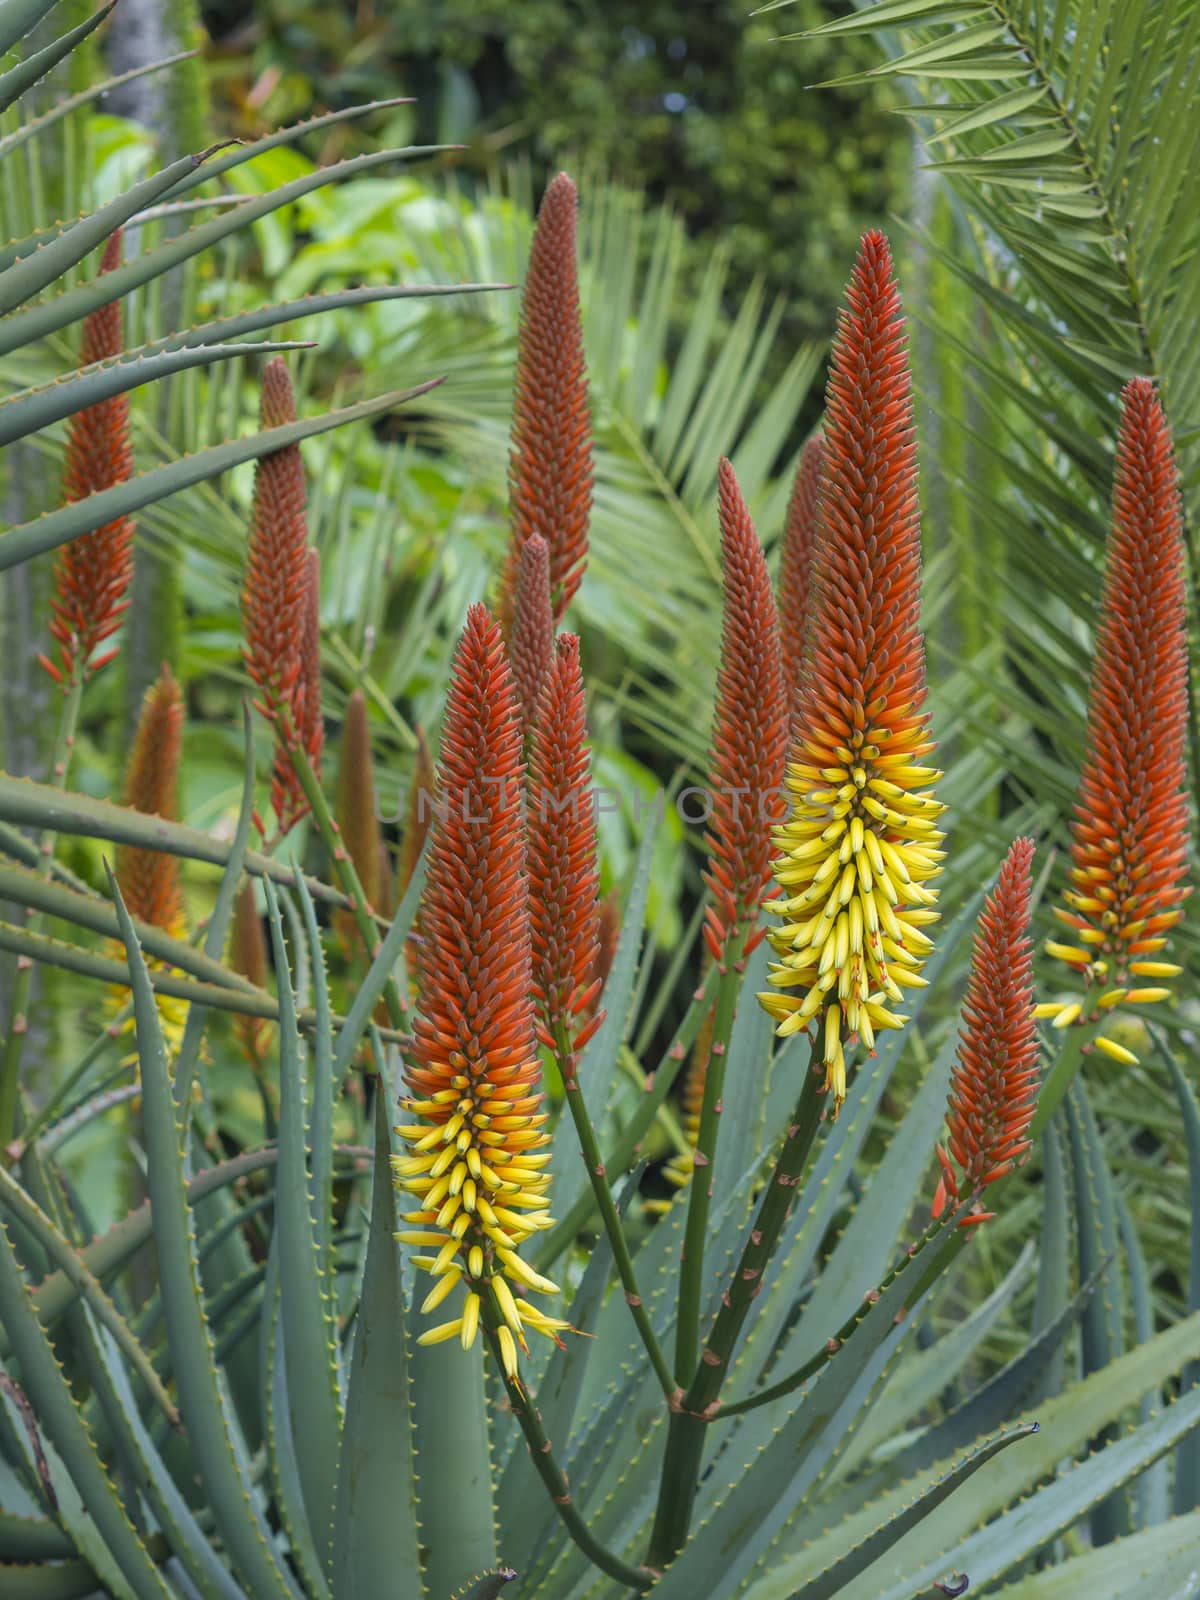 group of red and yellow blooming candelabra aloe flowers- Aloe arborescens in tropical botanical garden on Tenerife, selective focus by Henkeova